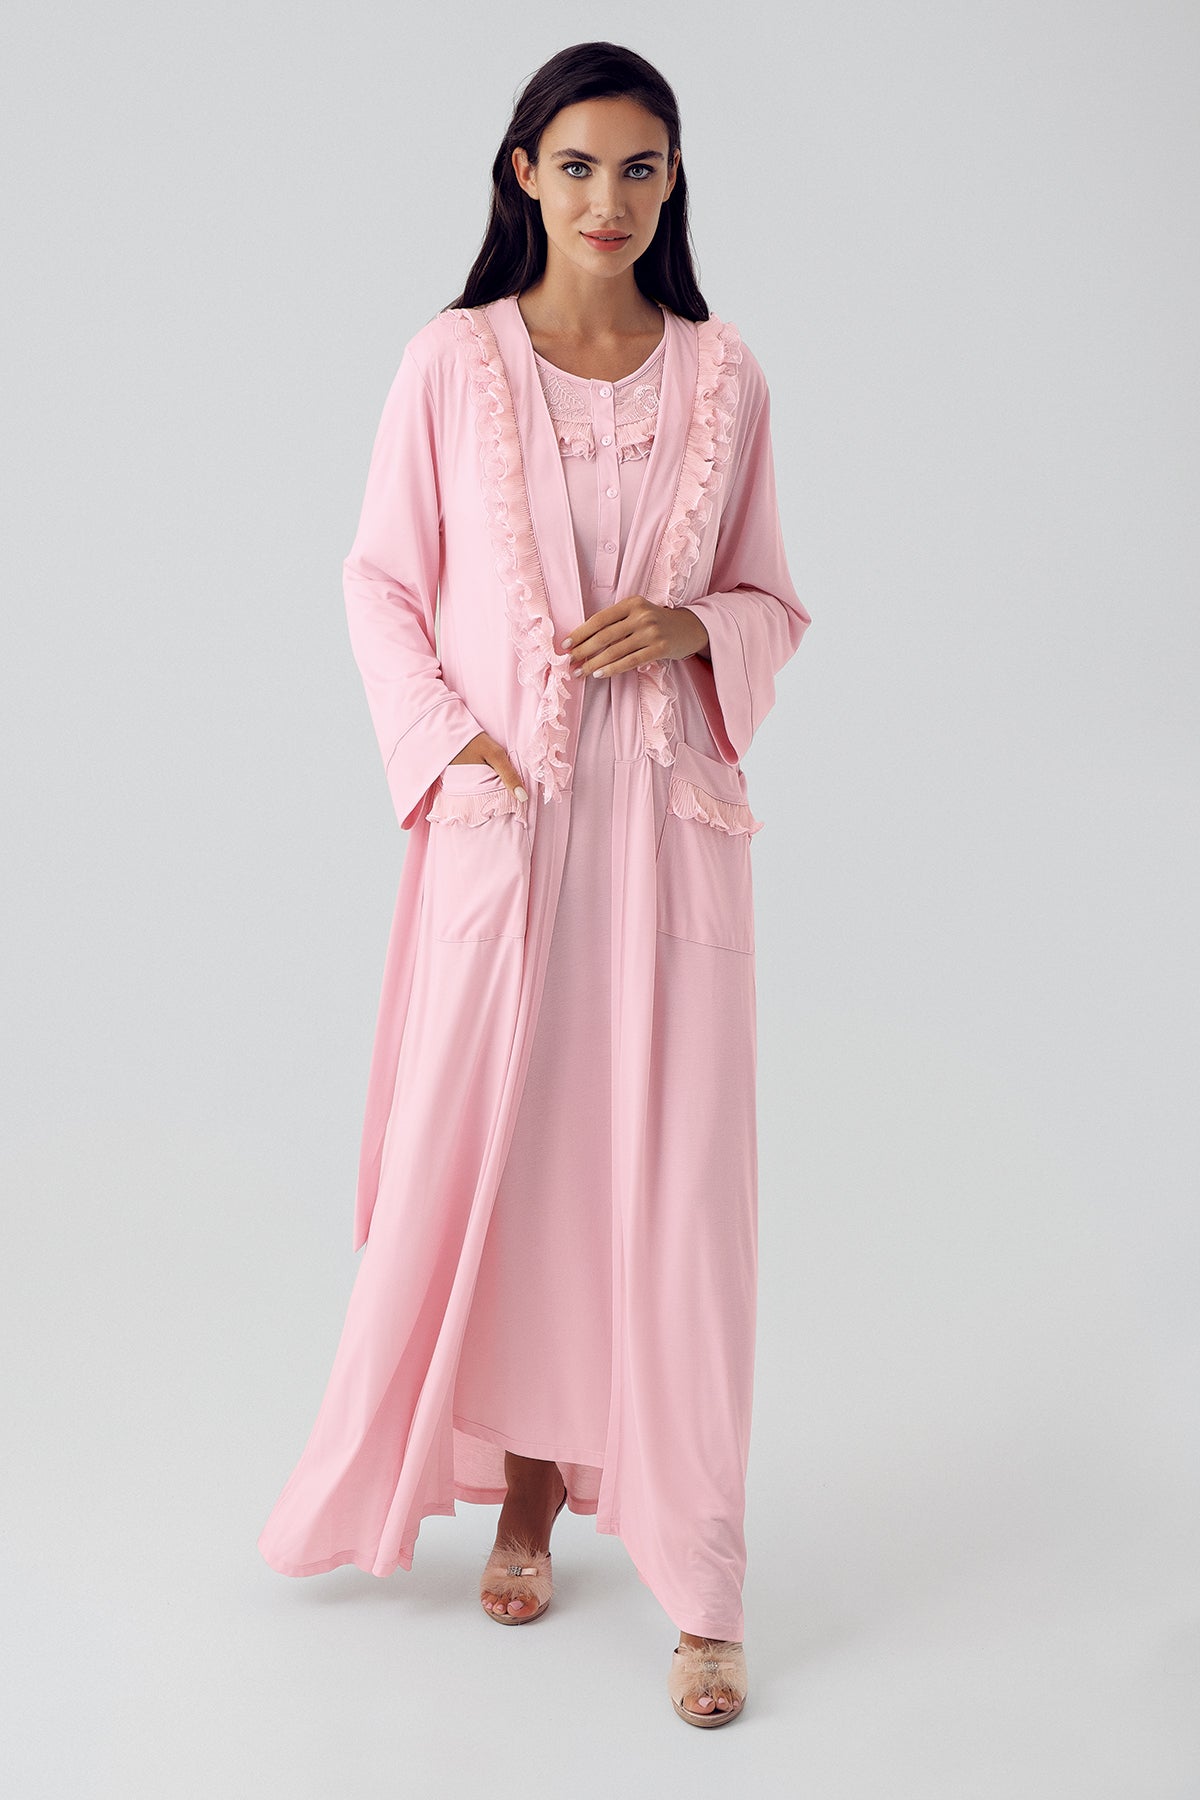 Shopymommy 15410 Lace Detailed Maternity & Nursing Nightgown With Robe Powder